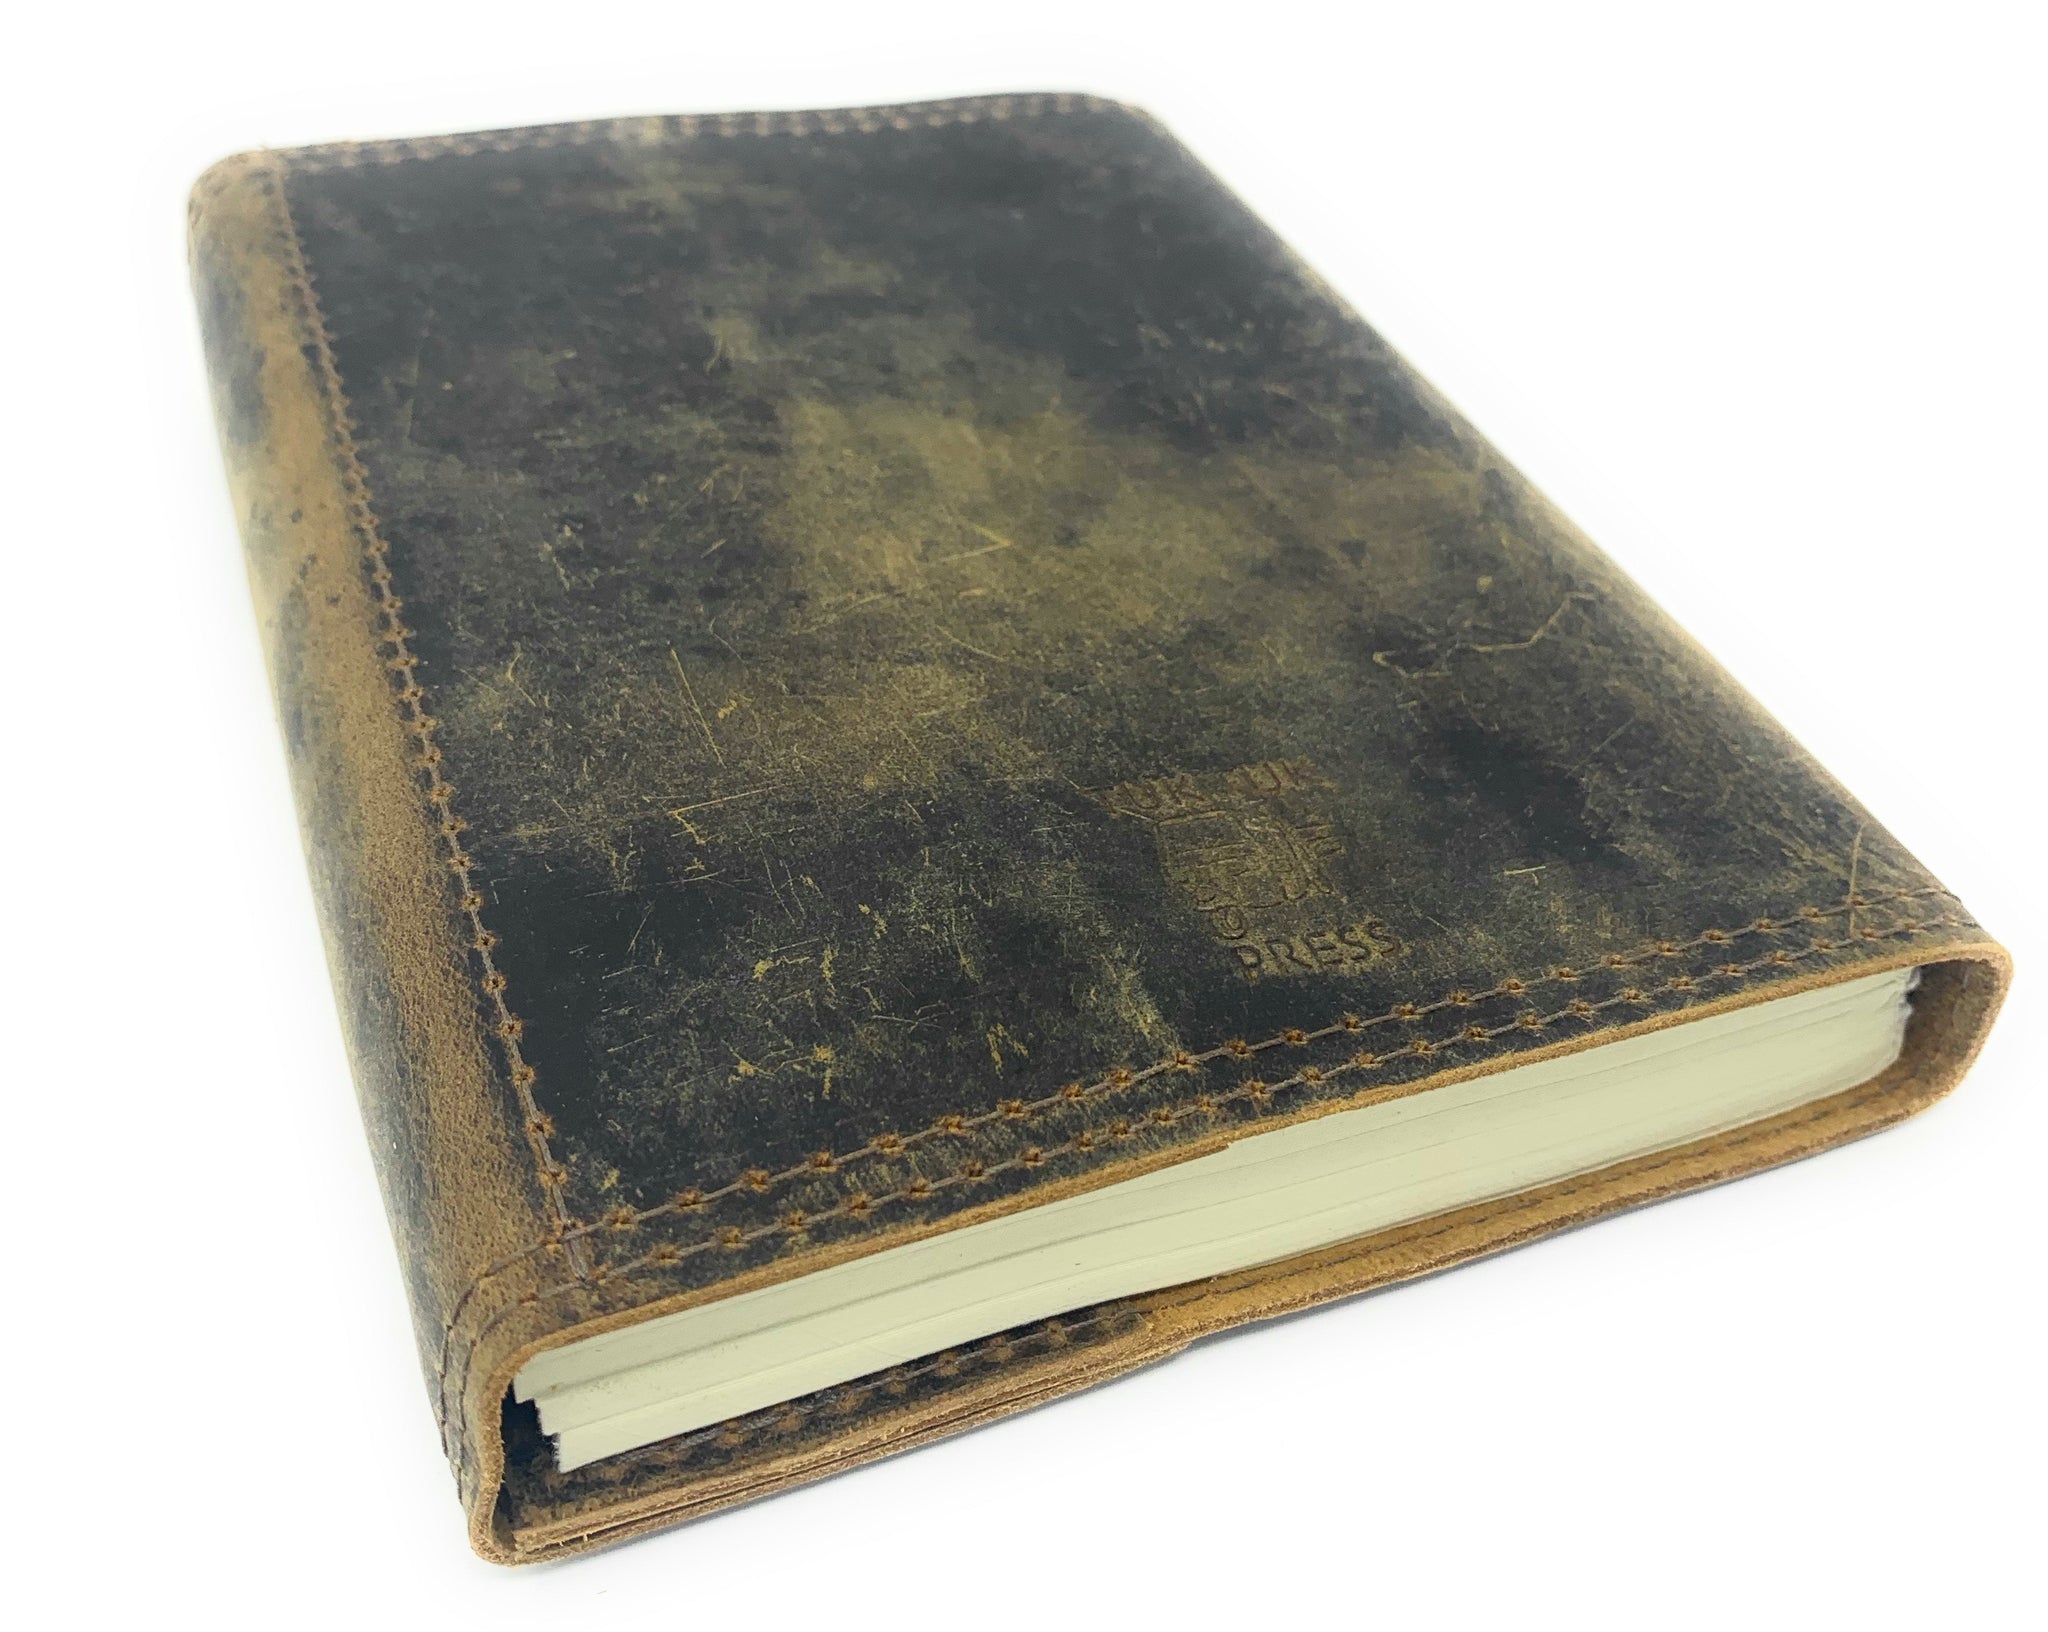 Vintage Leather Journal Blank Pages